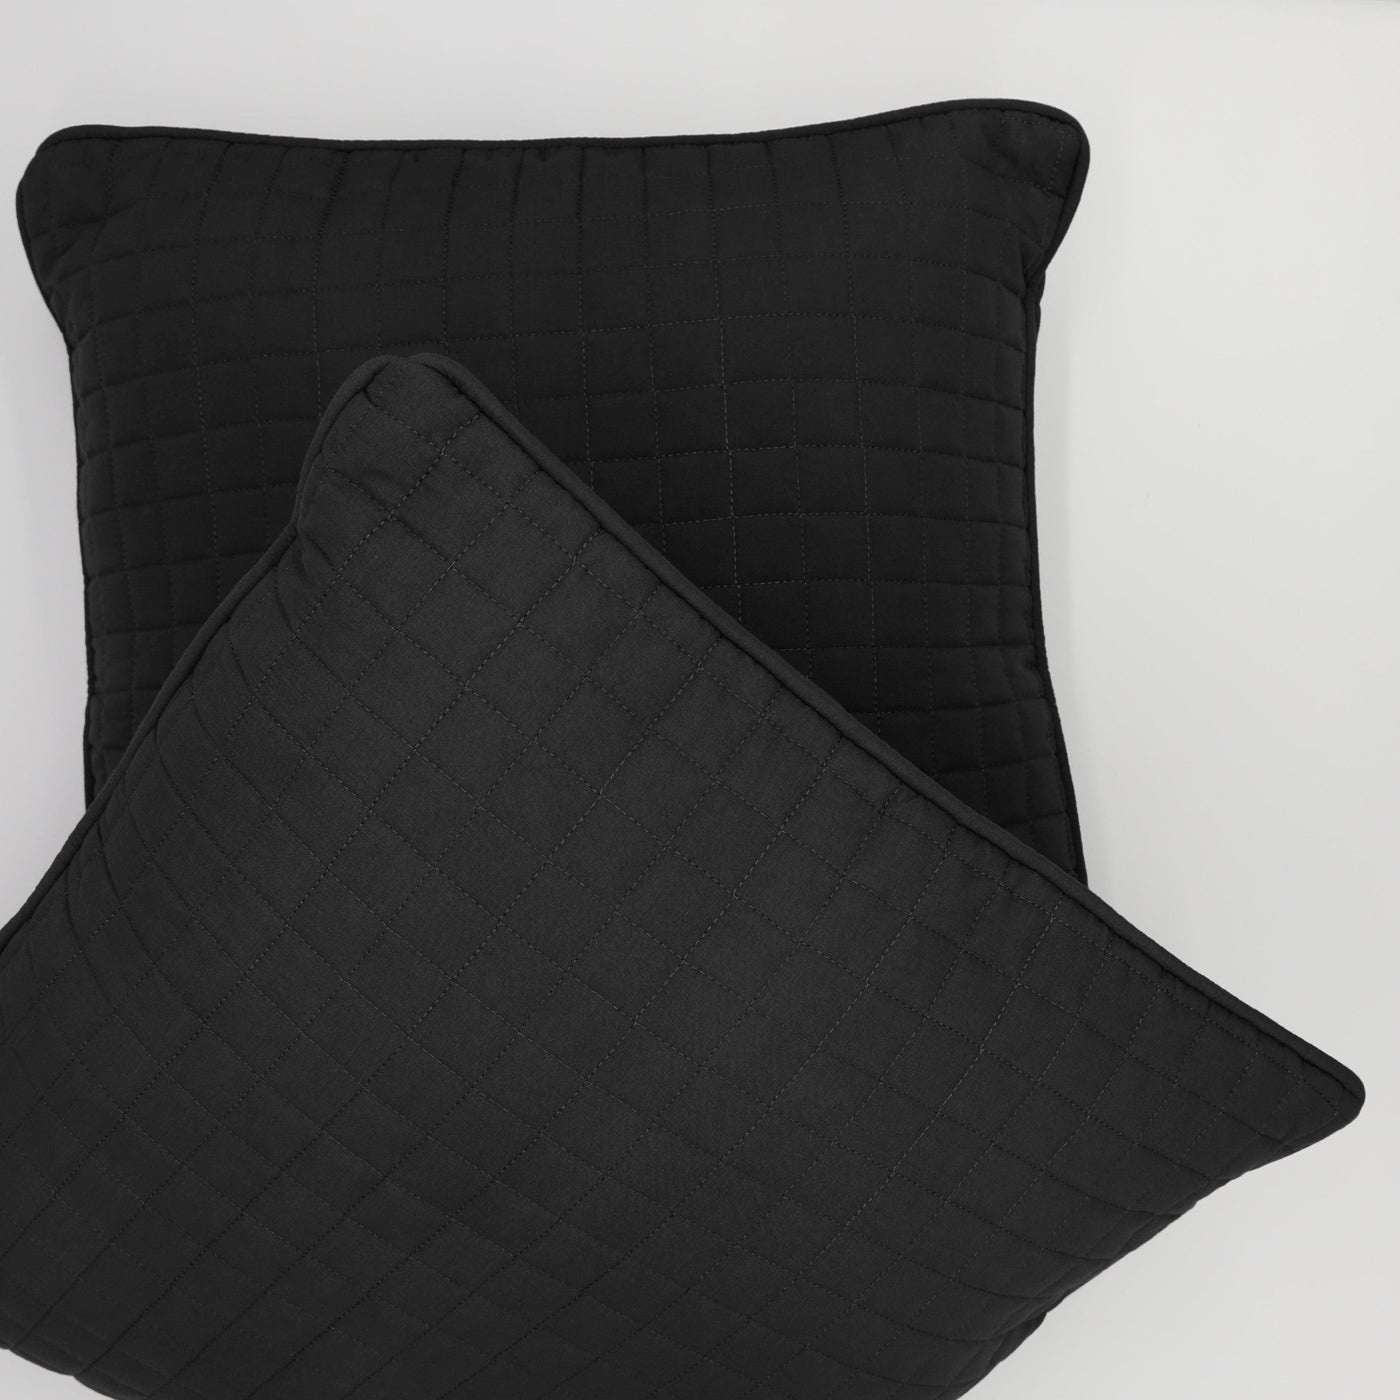 Top View of Vilano Quilted Sham and Pillow Covers in Black#color_vilano-black